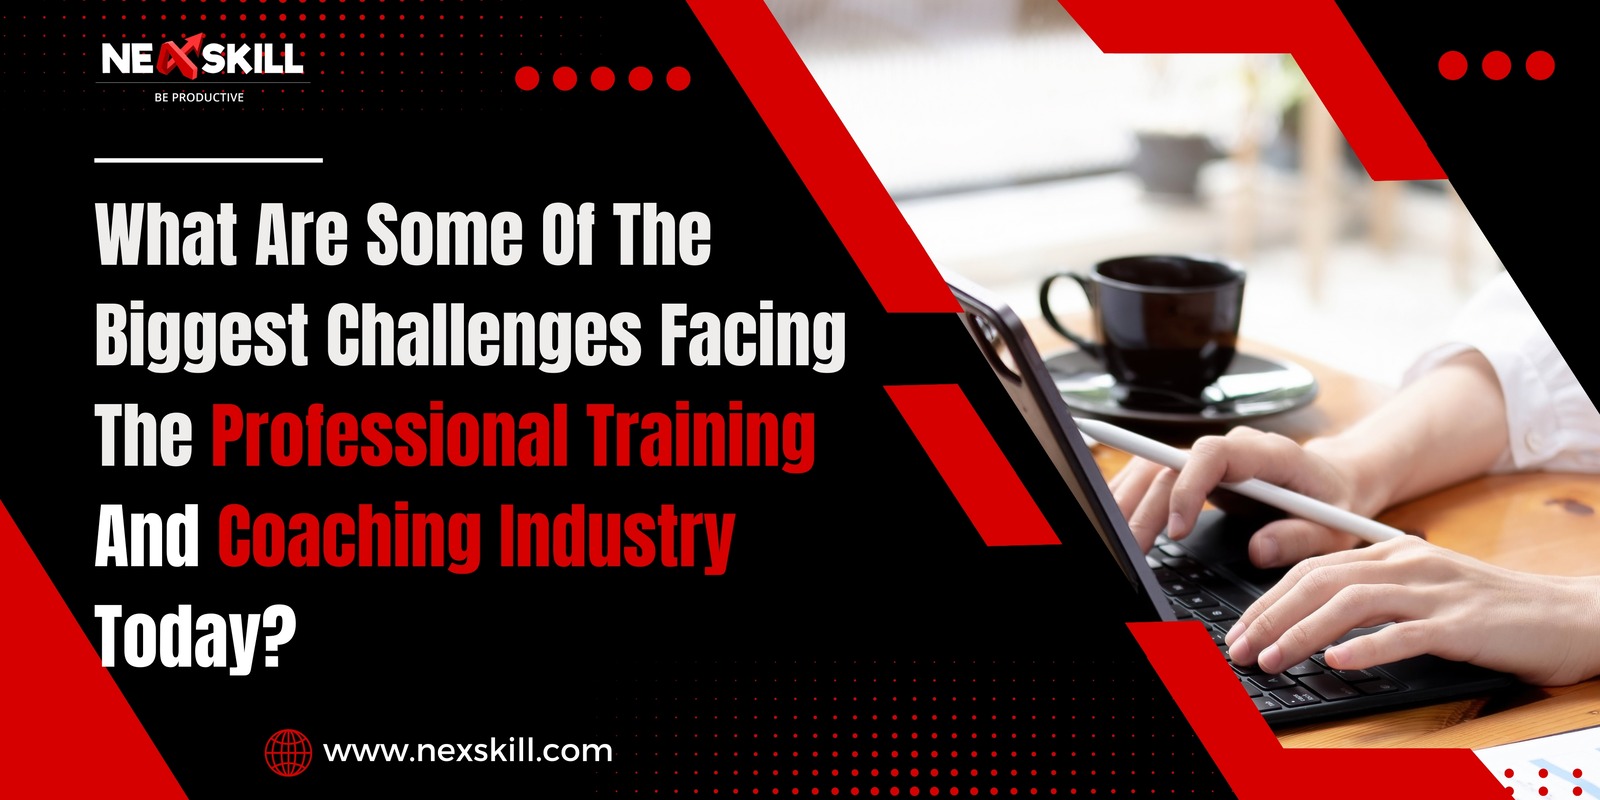 What are Some of the Biggest Challenges Facing the Professional Training and Coaching Industry Today?